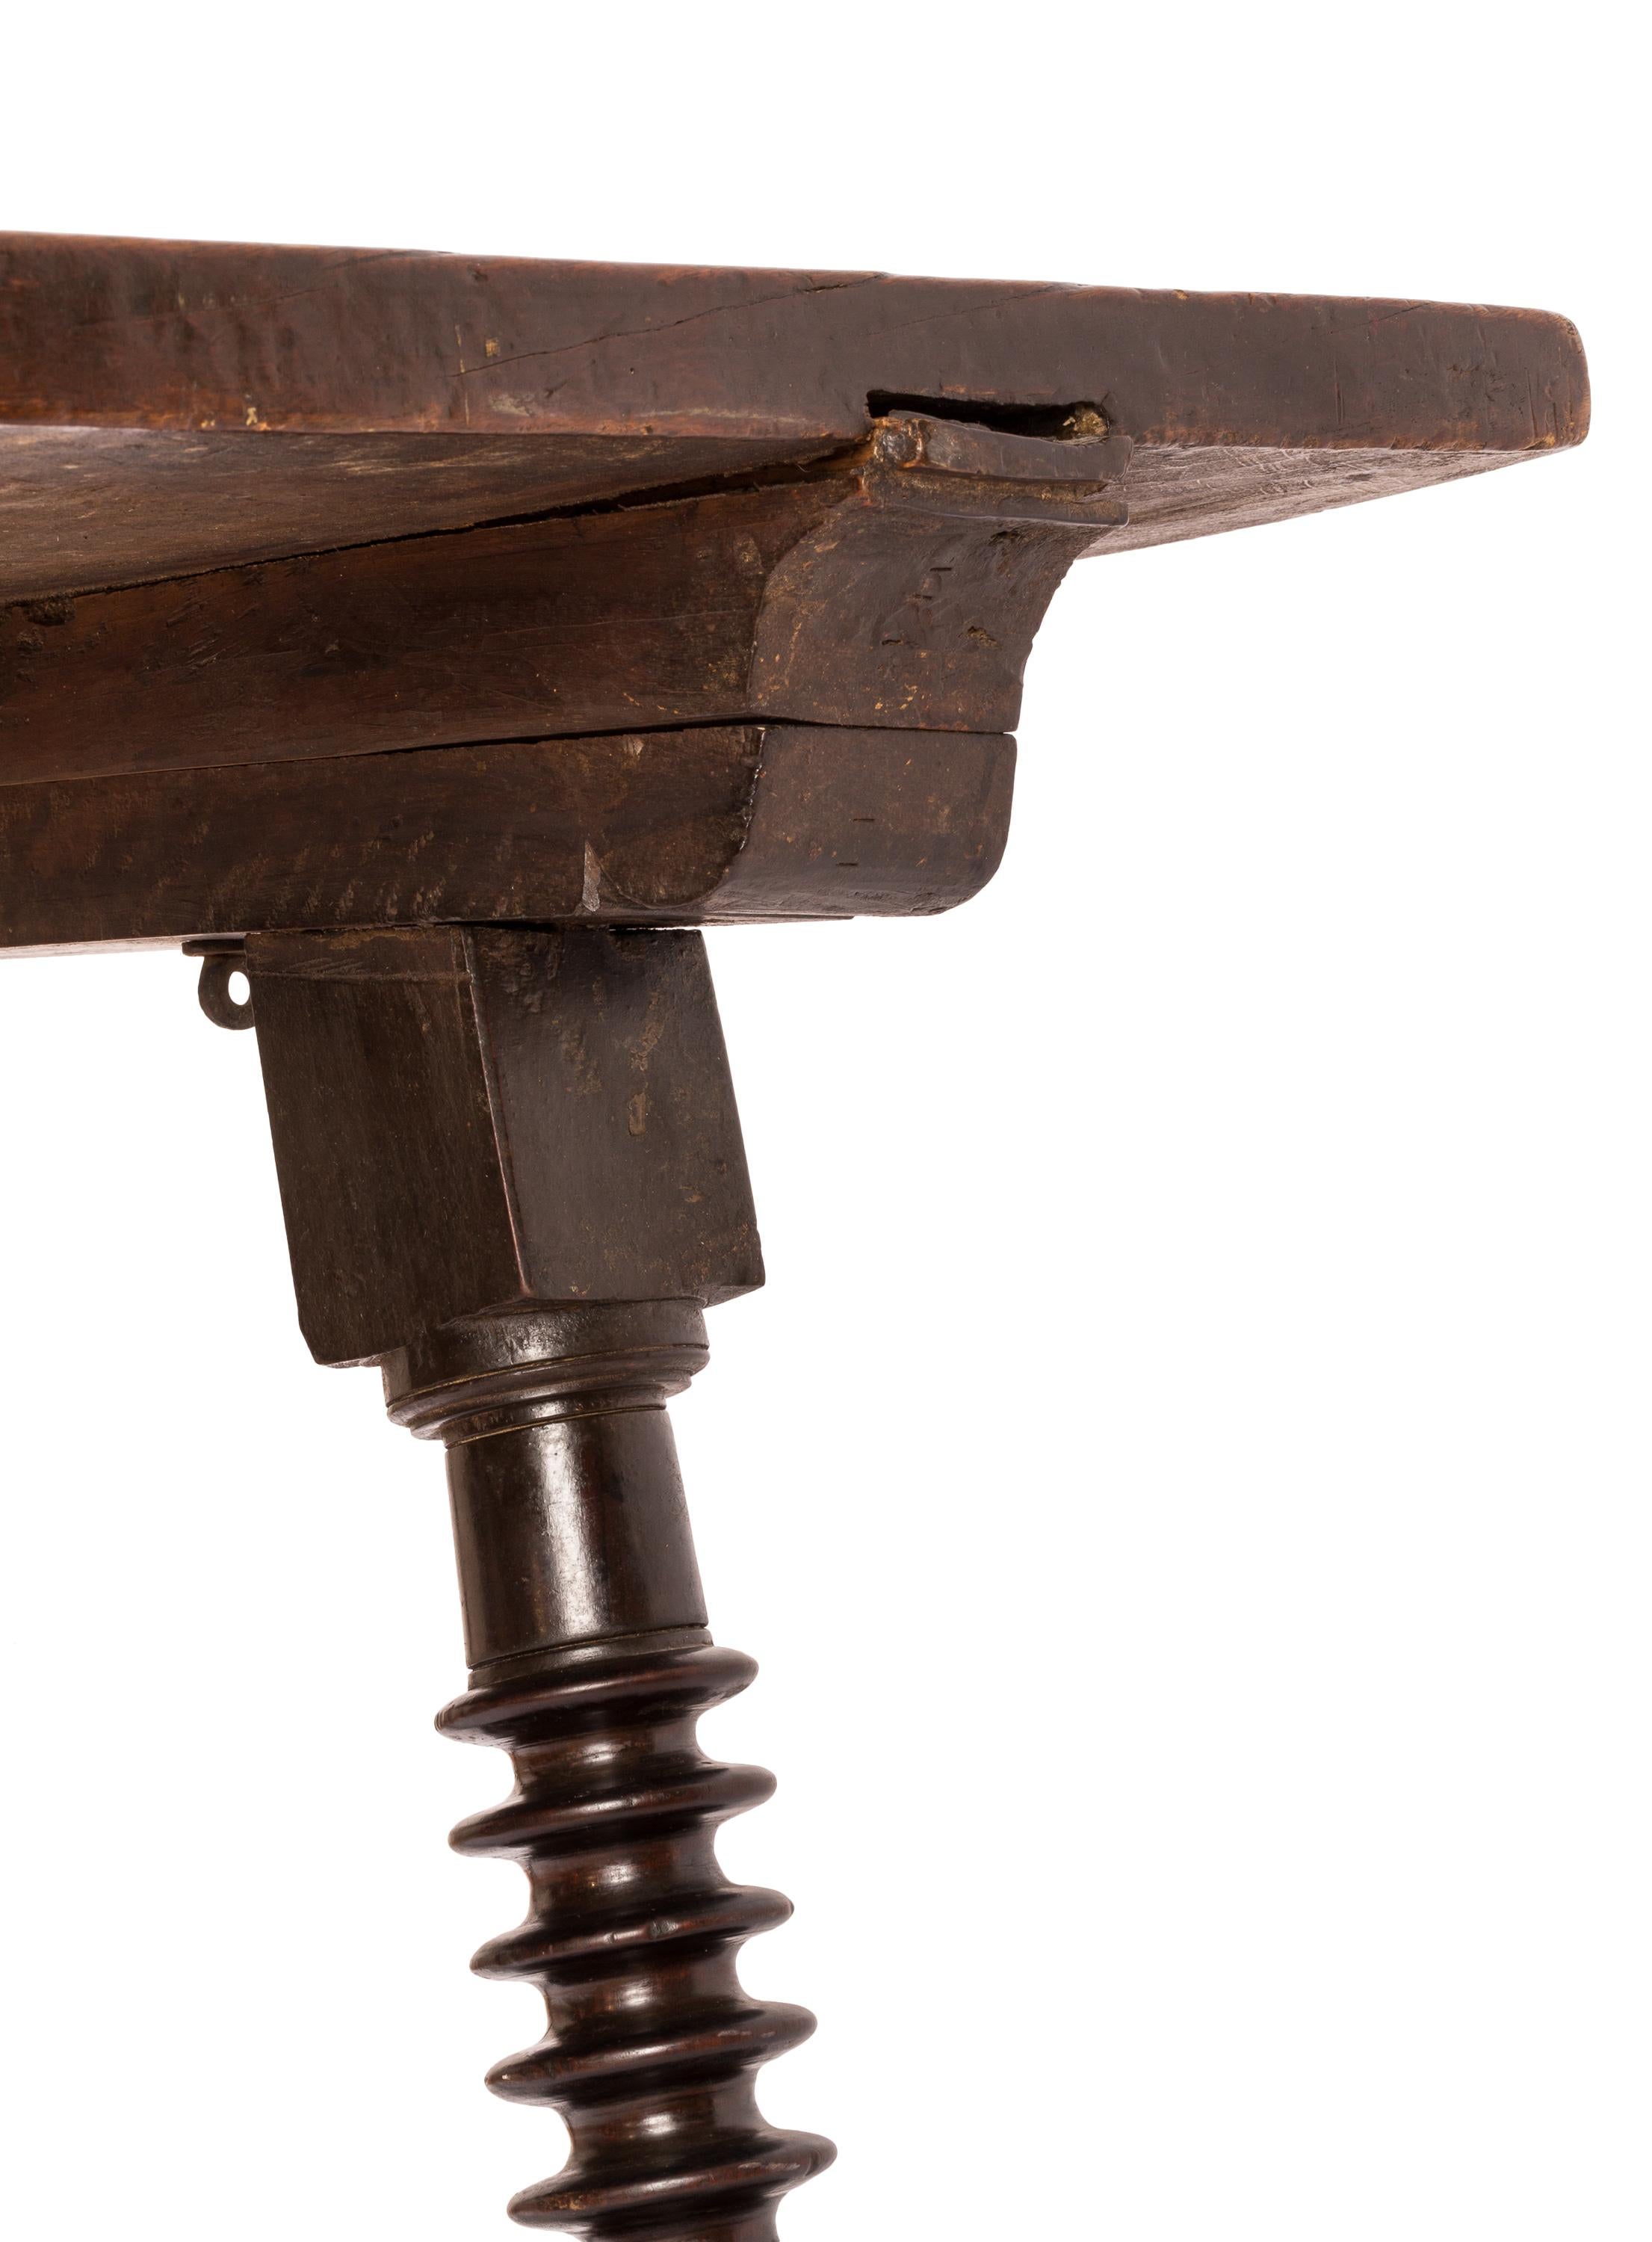 how to date antique furniture by feet